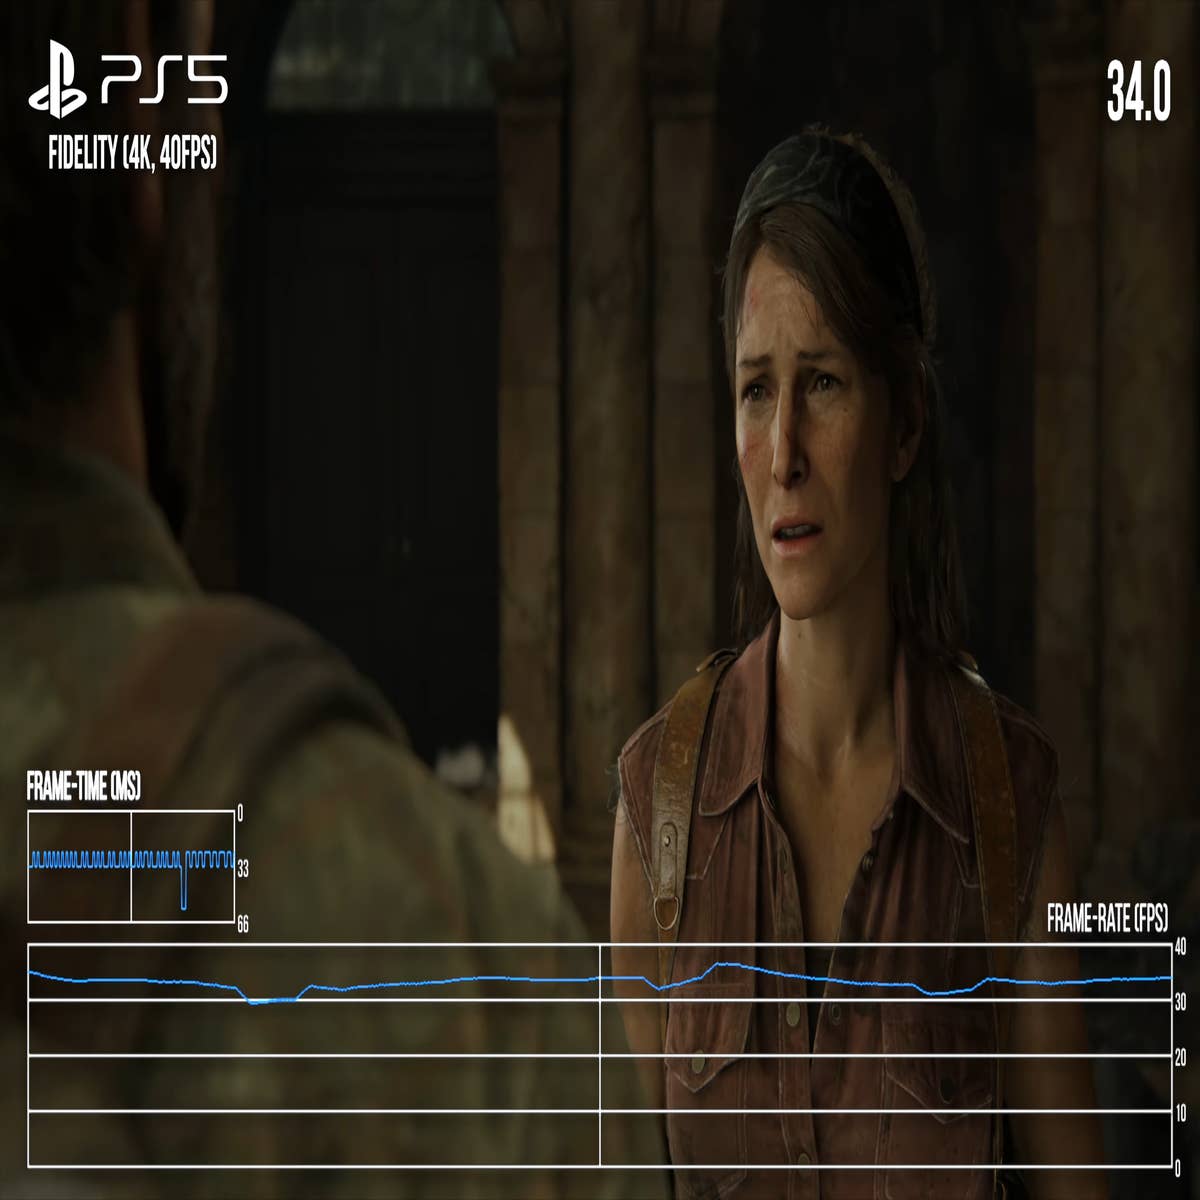 DF Direct Weekly: The Last of Us Part 1 PC requirements hint at an